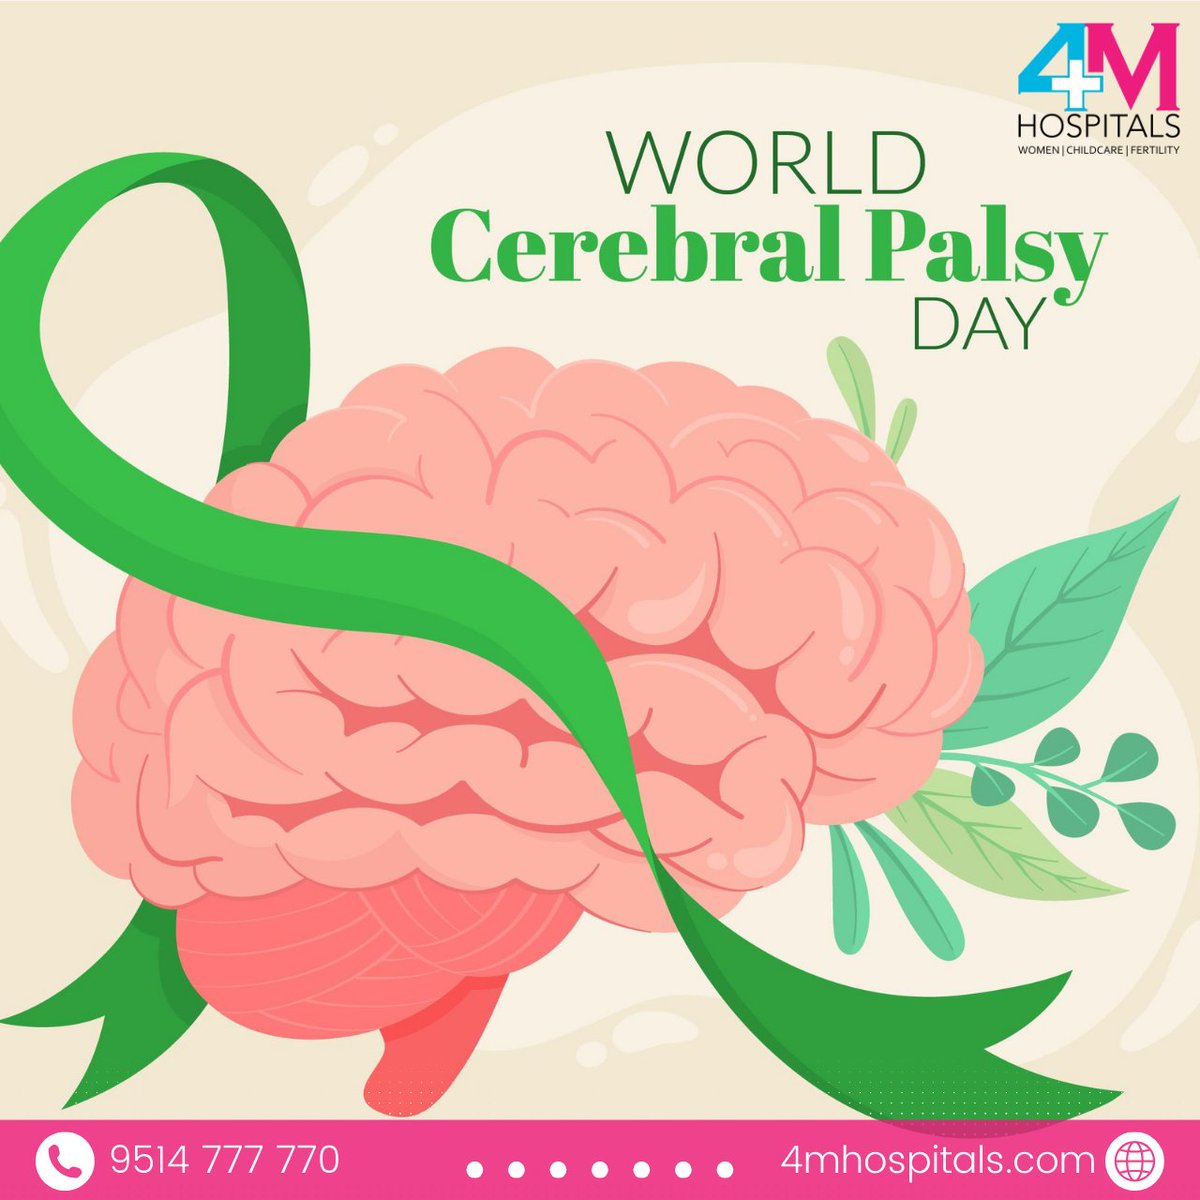 World Cerebral Palsy Day
On World Cerebral Palsy Day, let's break down barriers and create a world where everyone can thrive. Together, we can make a difference!
#CerebralPalsy
#CPAwareness
#CerebralPalsyAwareness
#CPWarrior
#AbilityNotDisability
#InclusionMatters